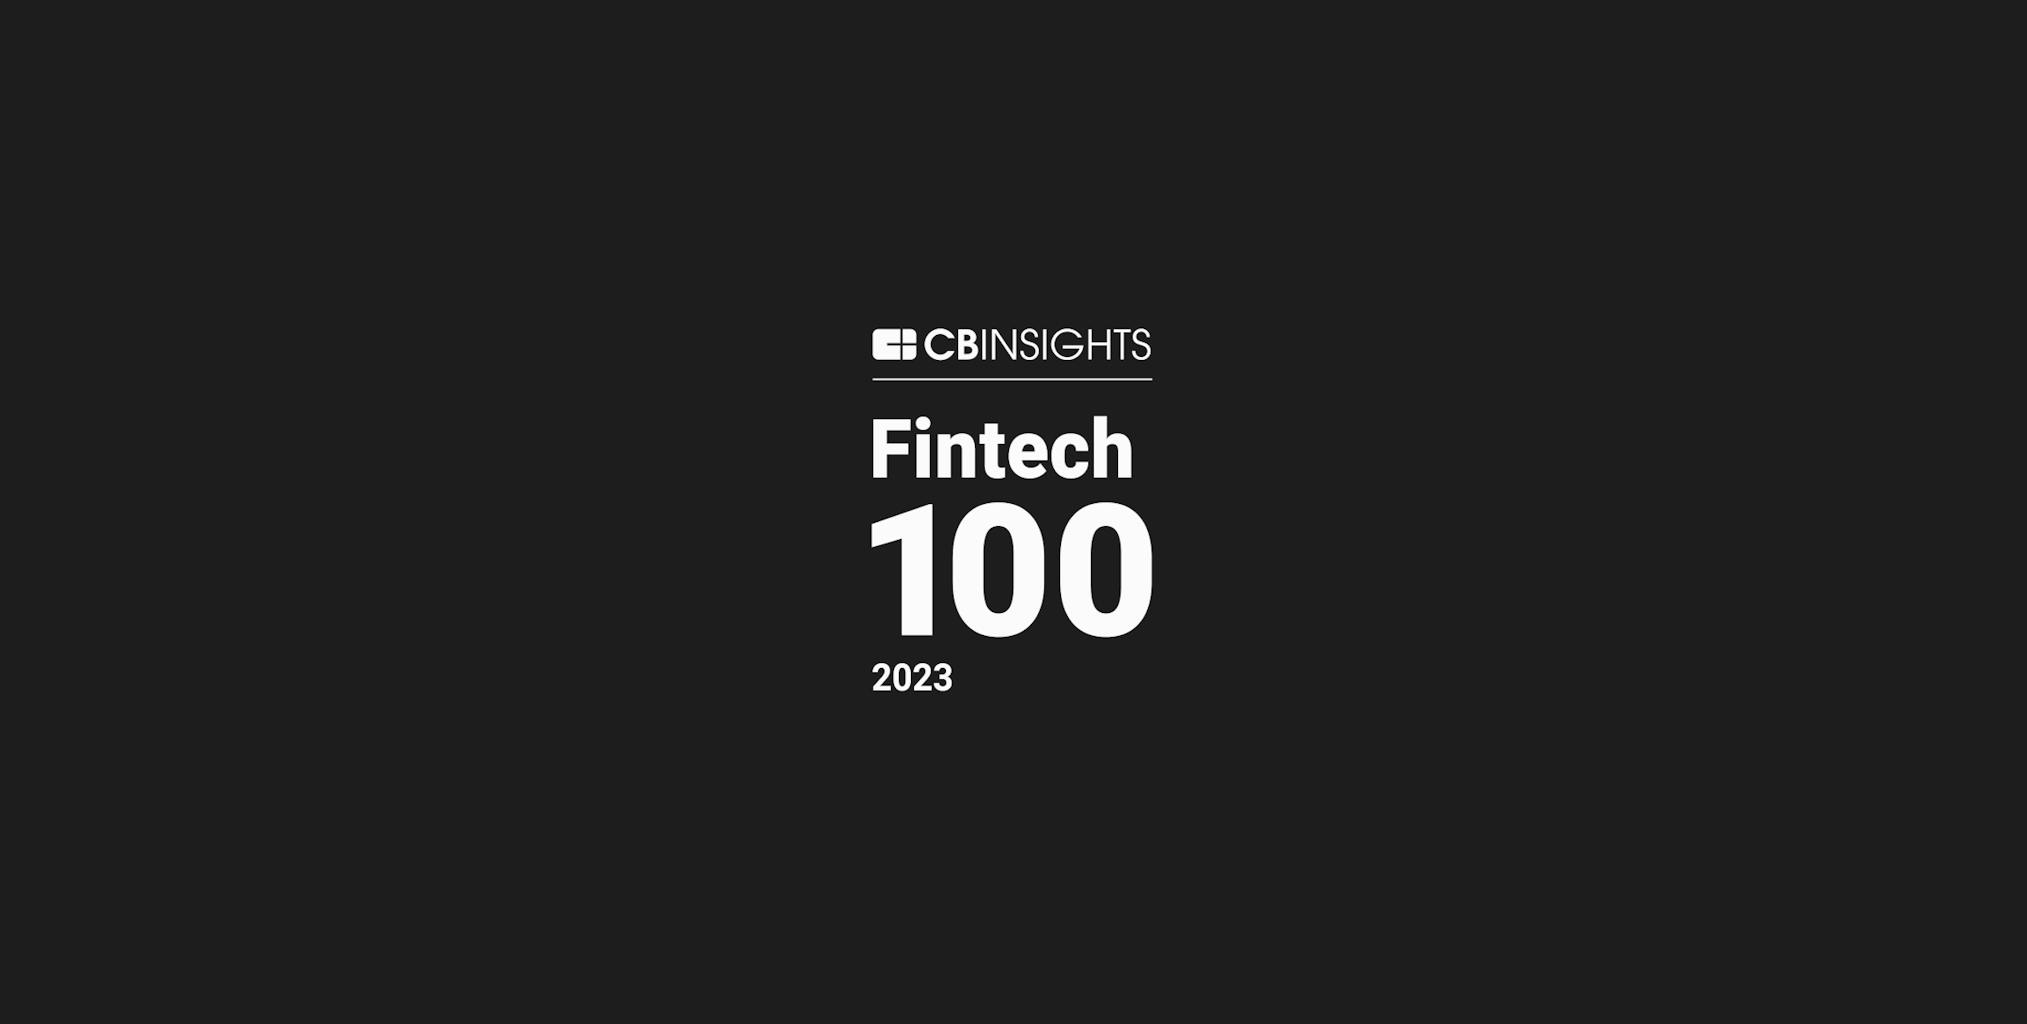 Banked named to CB Insights Fintech 100.